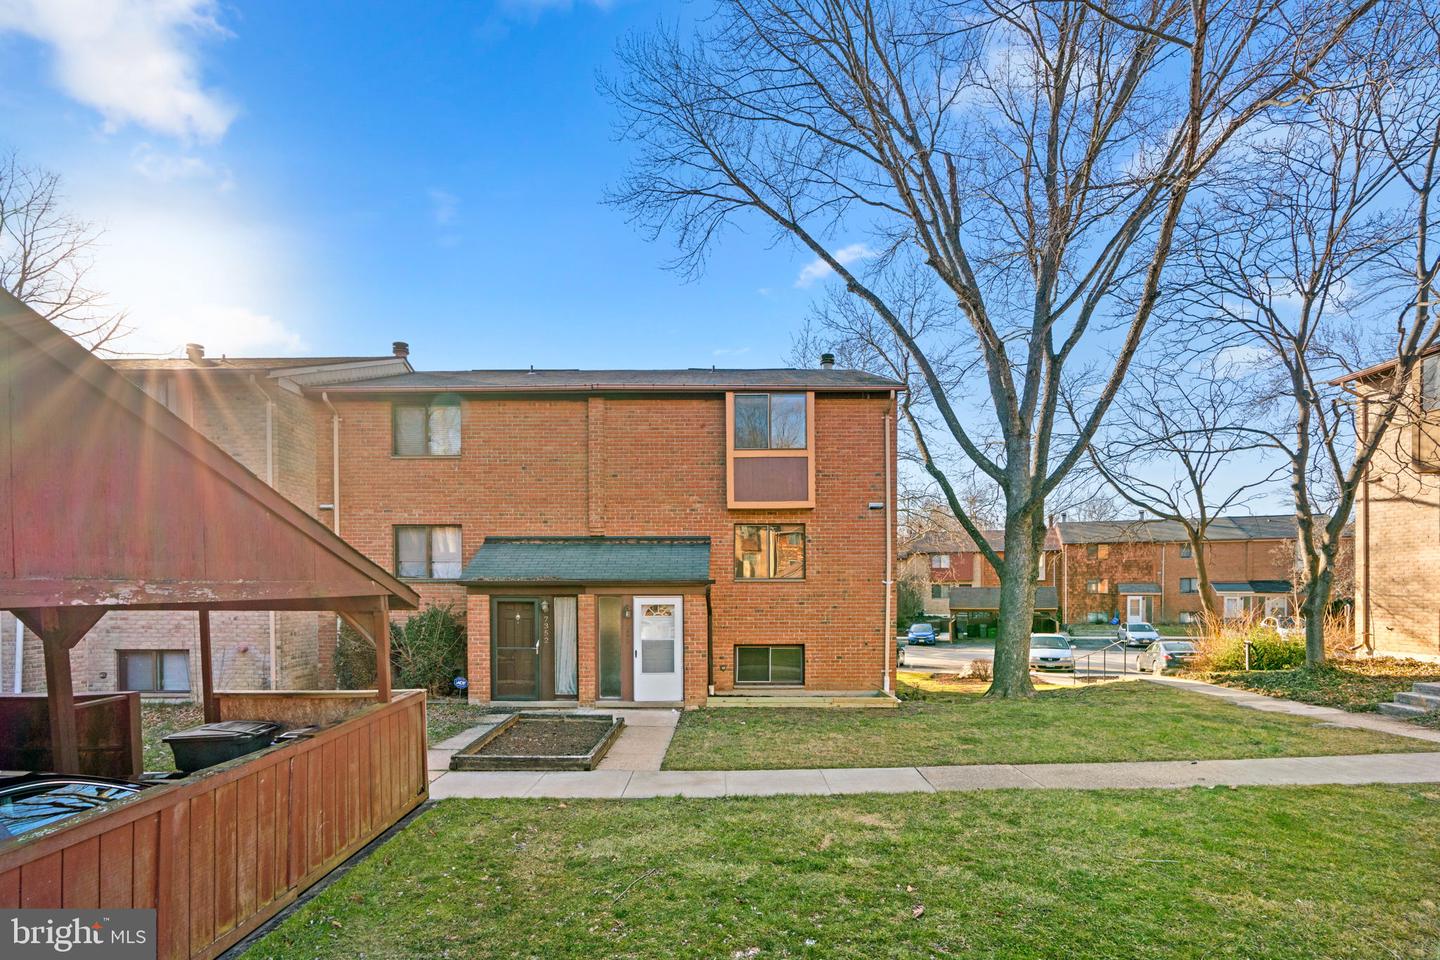 View Columbia, MD 21045 townhome